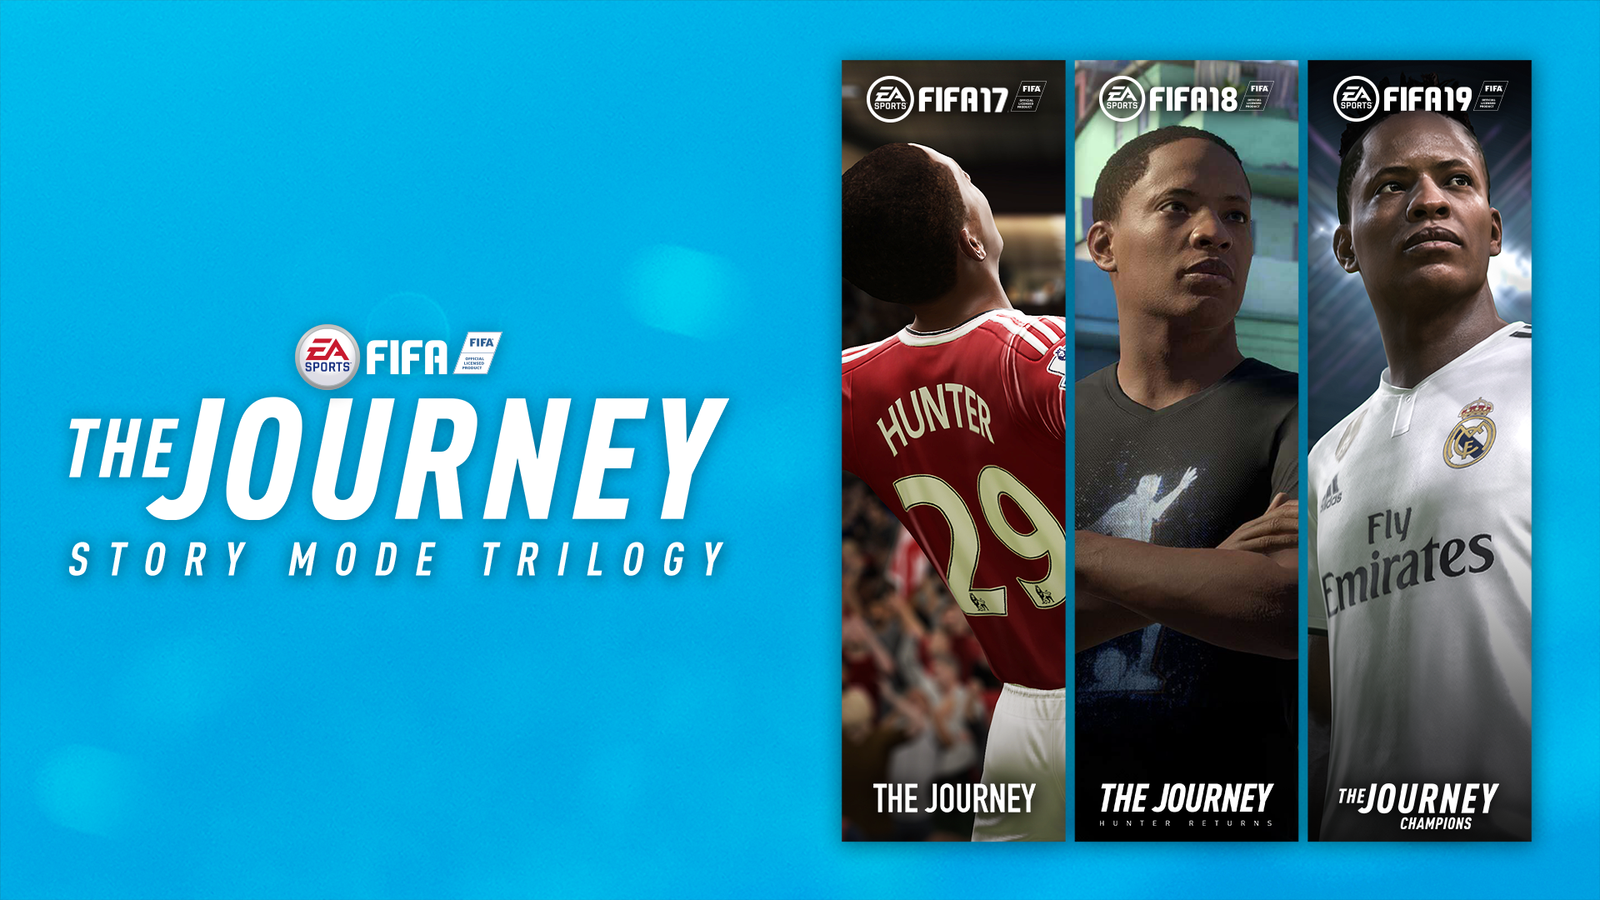 Fifa 19 Trilogy Of The Journey Mode Announced Fifaultimateteam It Uk